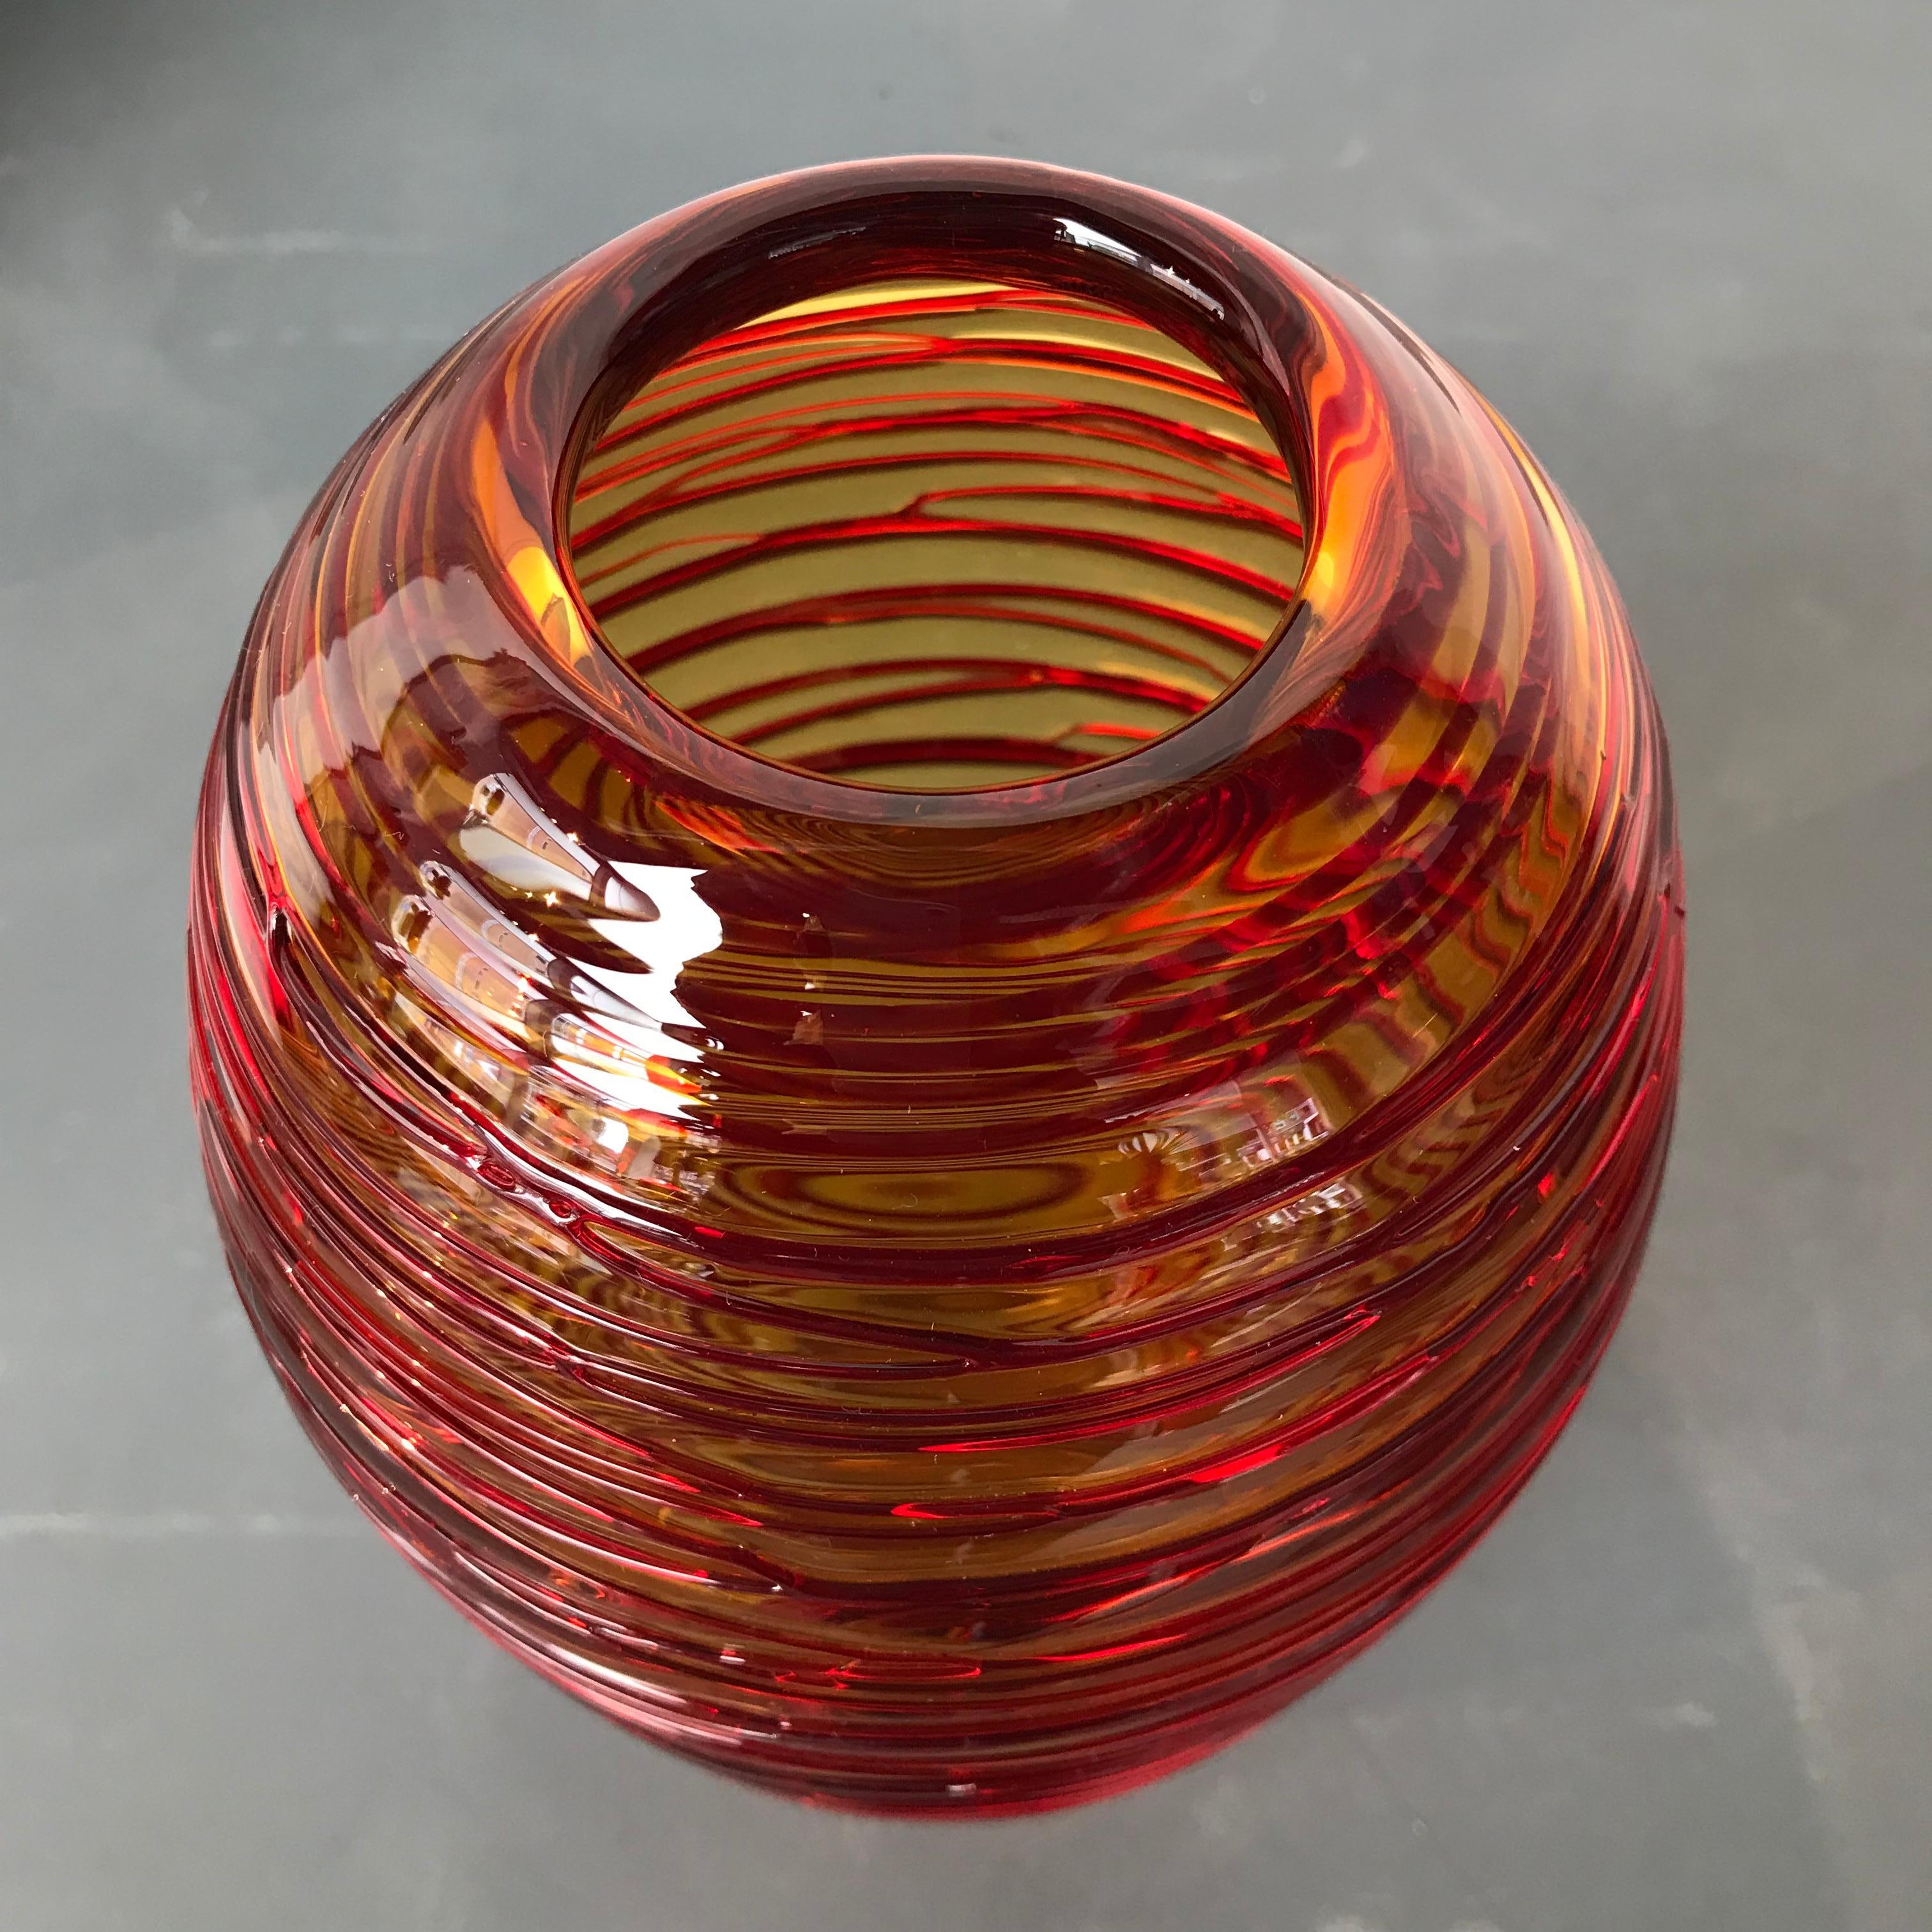 Hand-Crafted Monumental Threaded Art Glass Vase by Fulvio Bianconi for Venini, 1970s